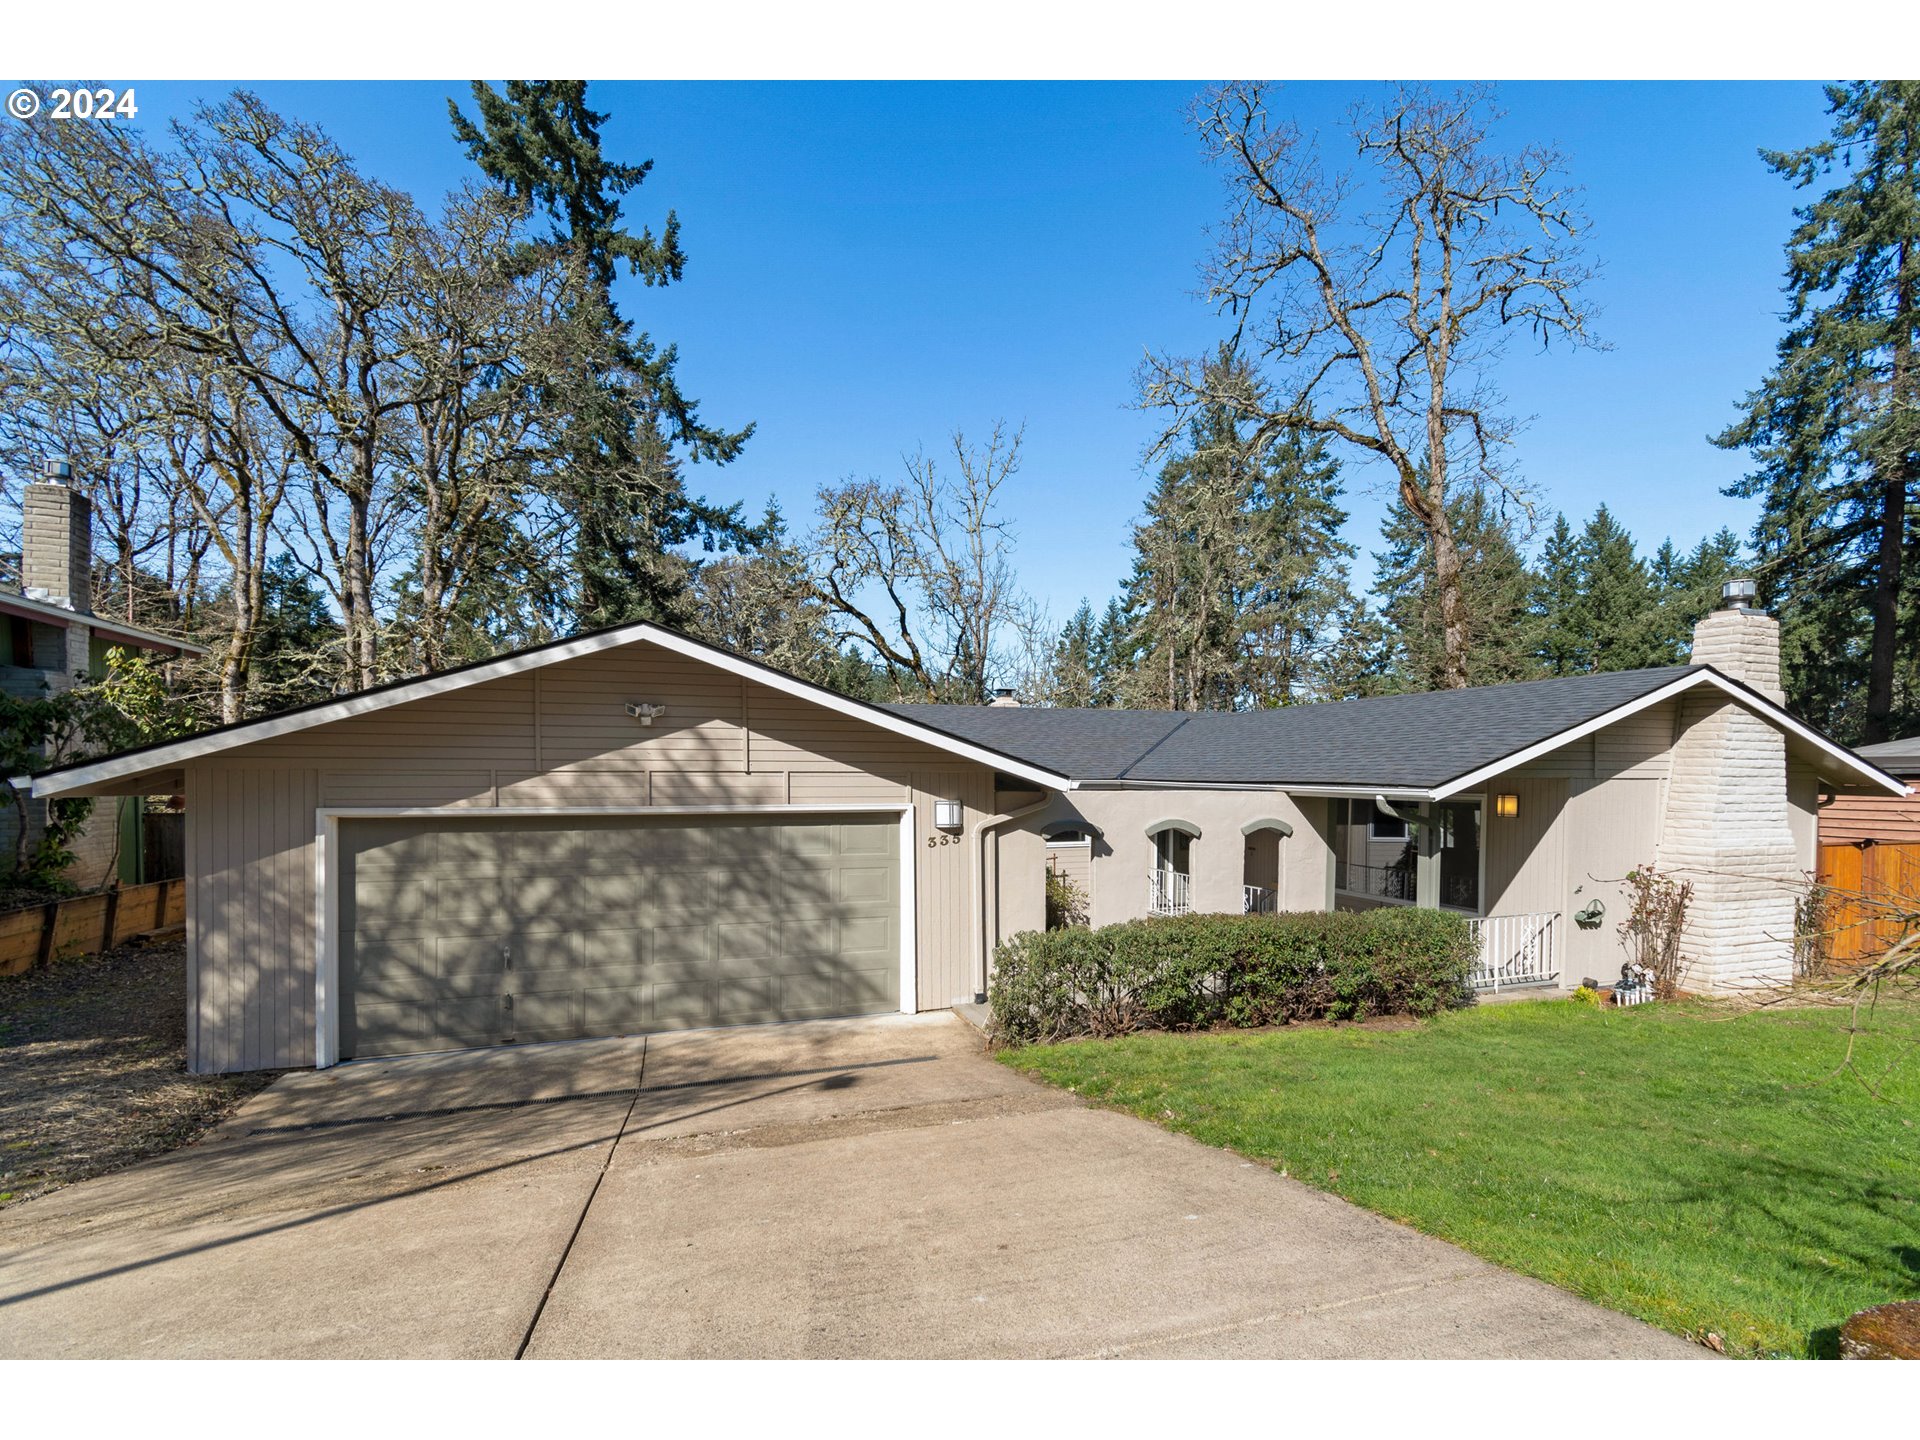 335 W 38TH AVE, Eugene, OR 